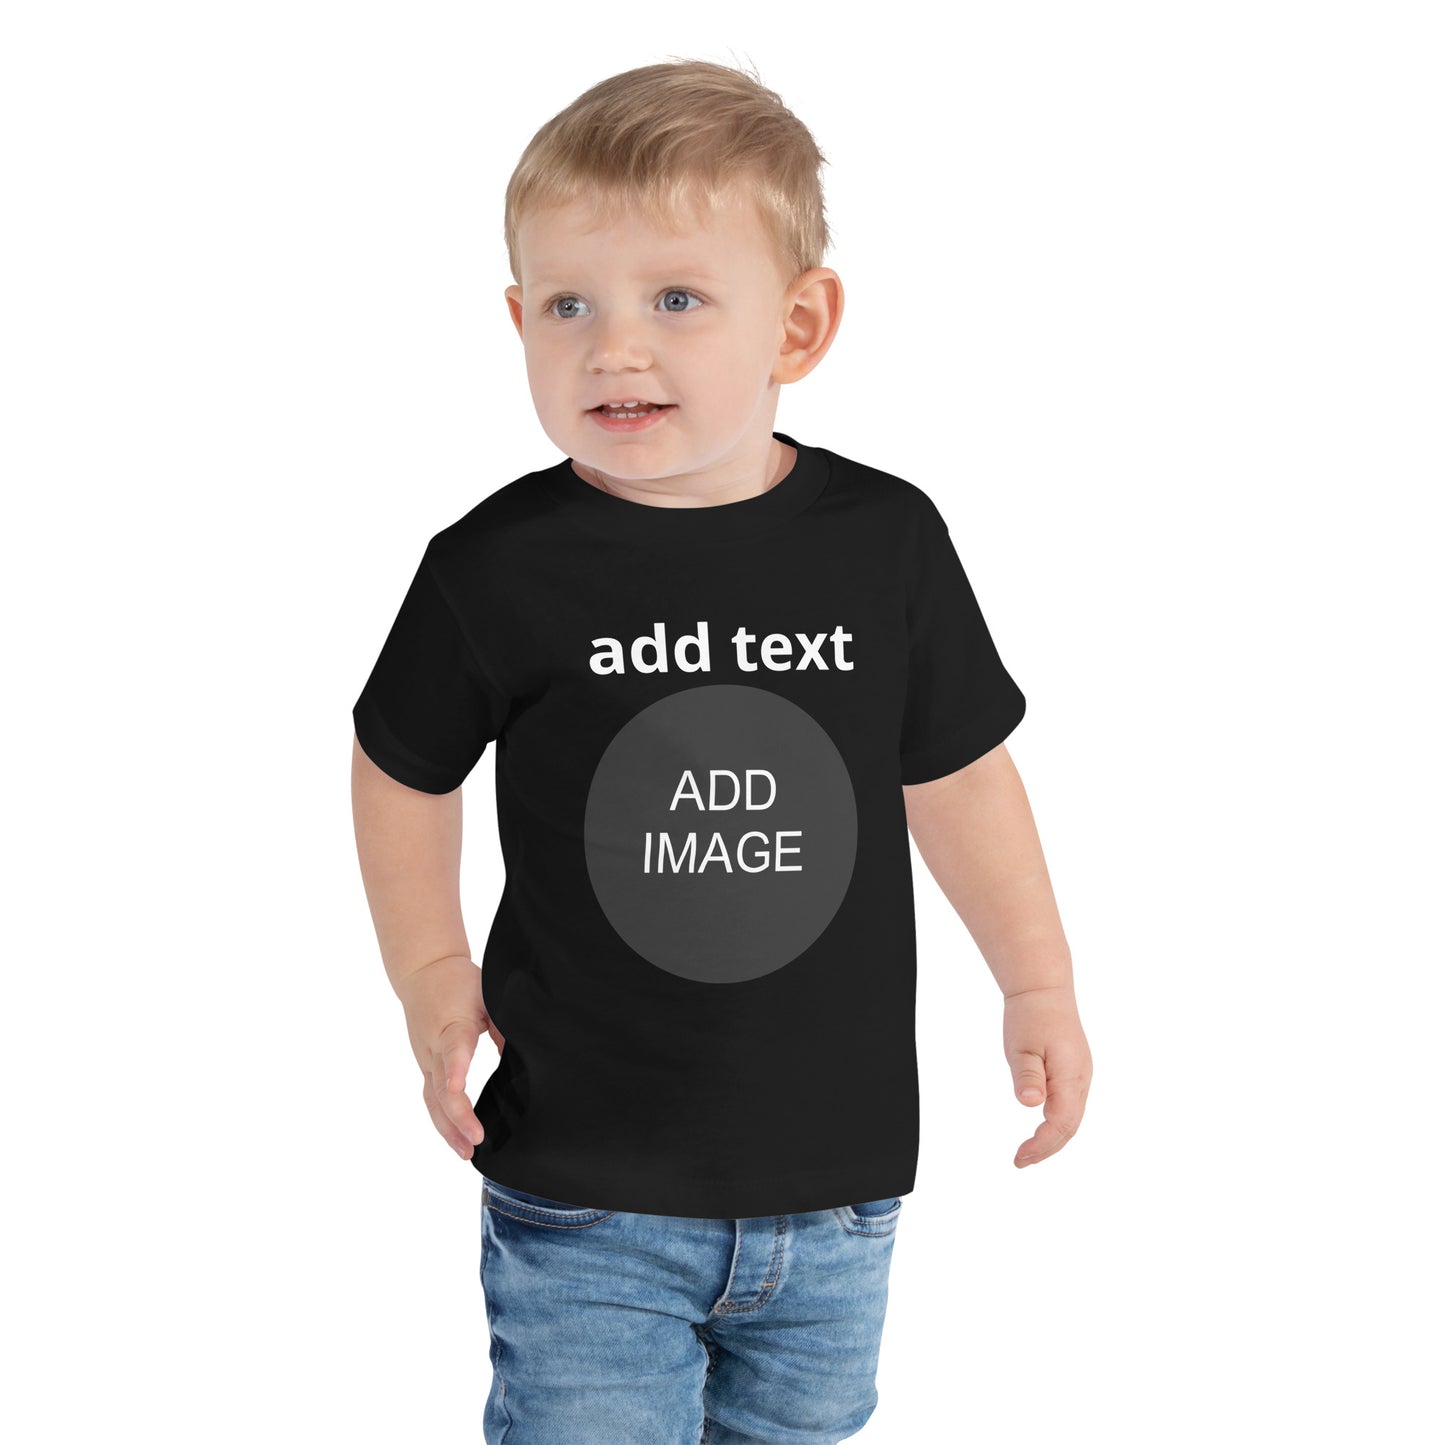 Toddler Short Sleeve Tee 2T-5T (front image & text)